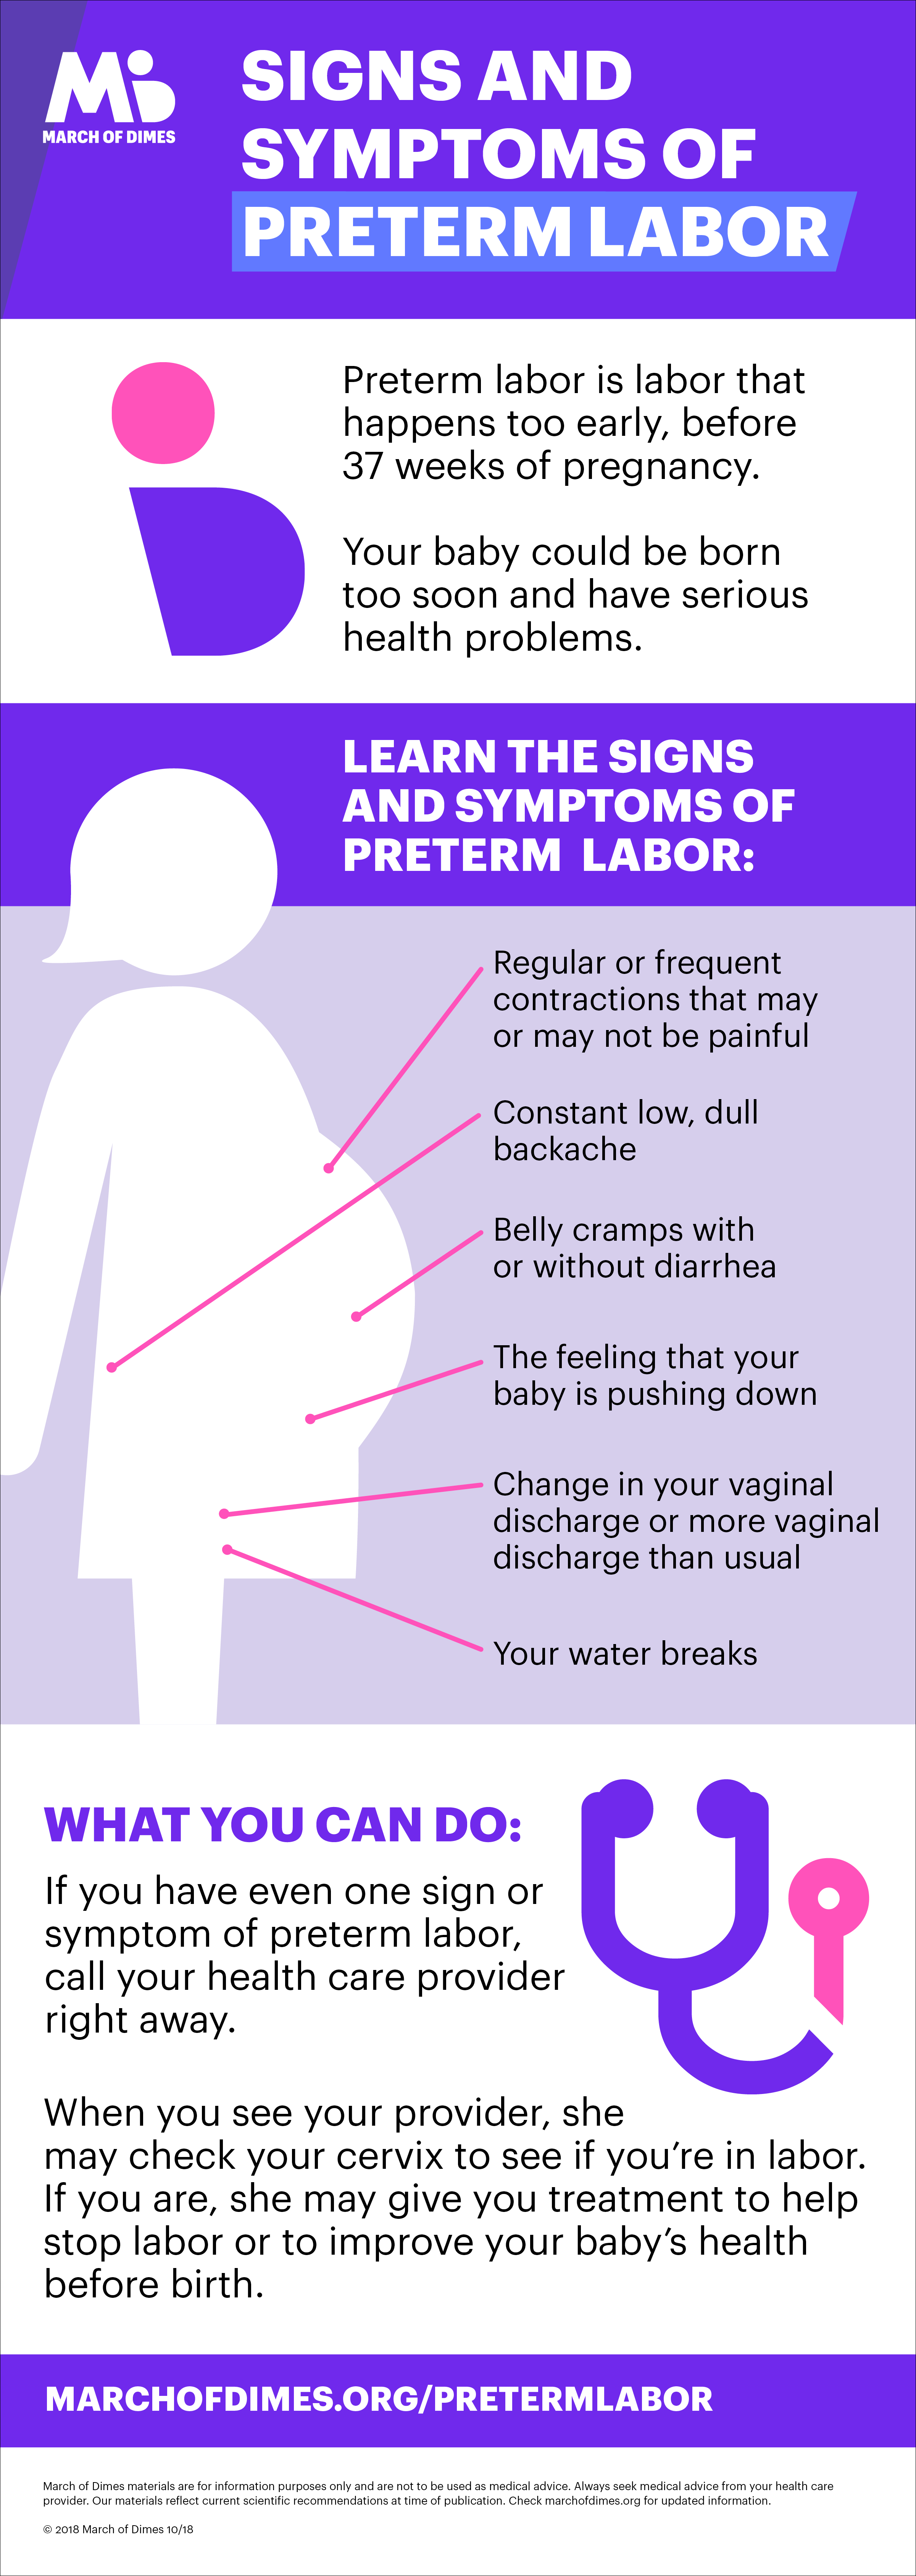 Signs and symptoms of preterm labor infographic